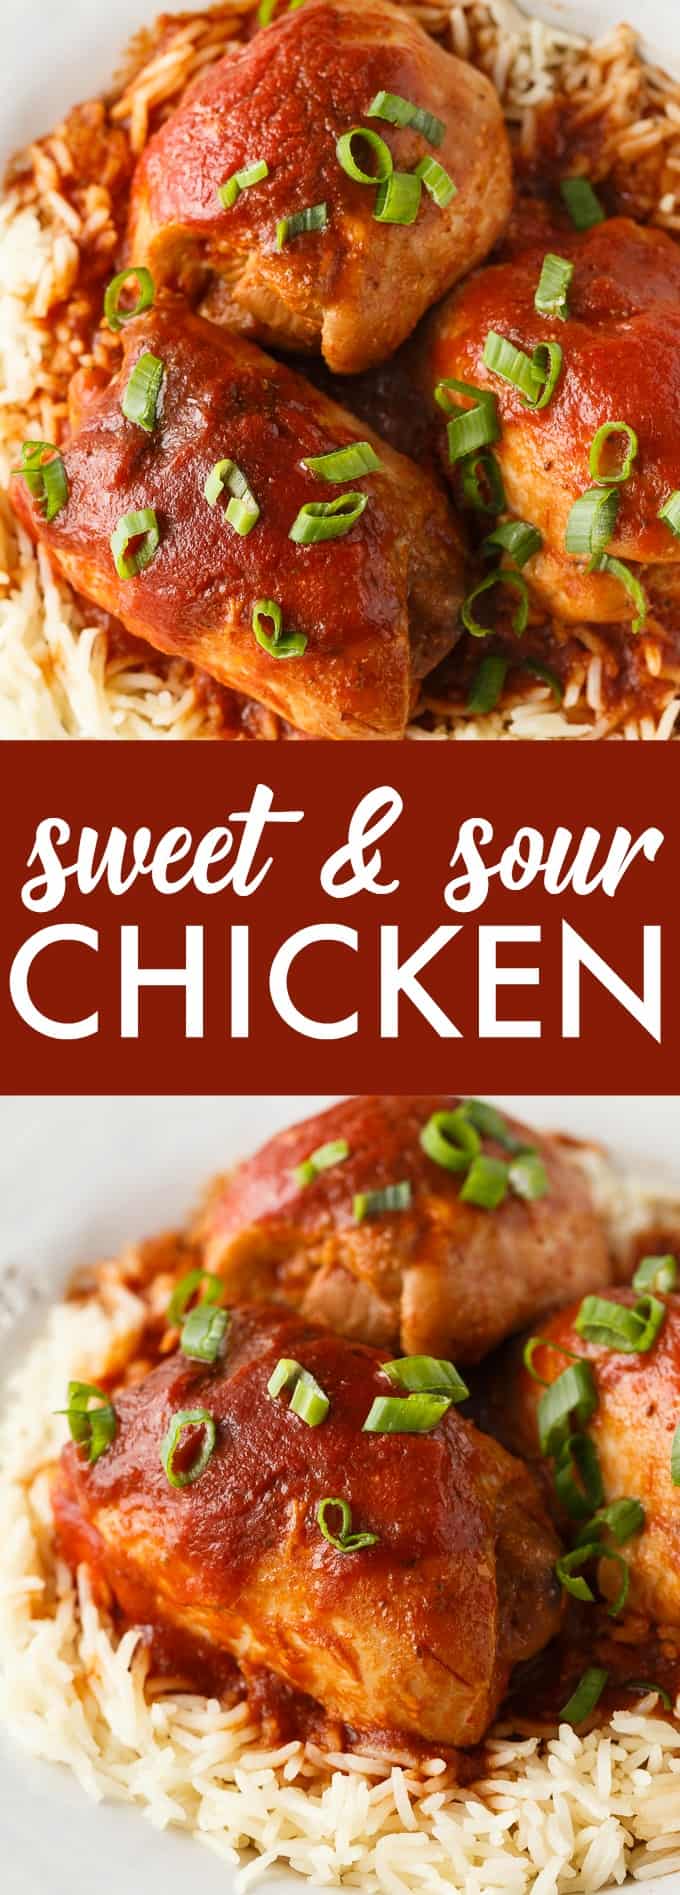 Sweet and Sour Chicken - Make this easy chicken recipe your family will love in just 30 minutes! This Asian-inspired weeknight dinner lets you skip takeout.